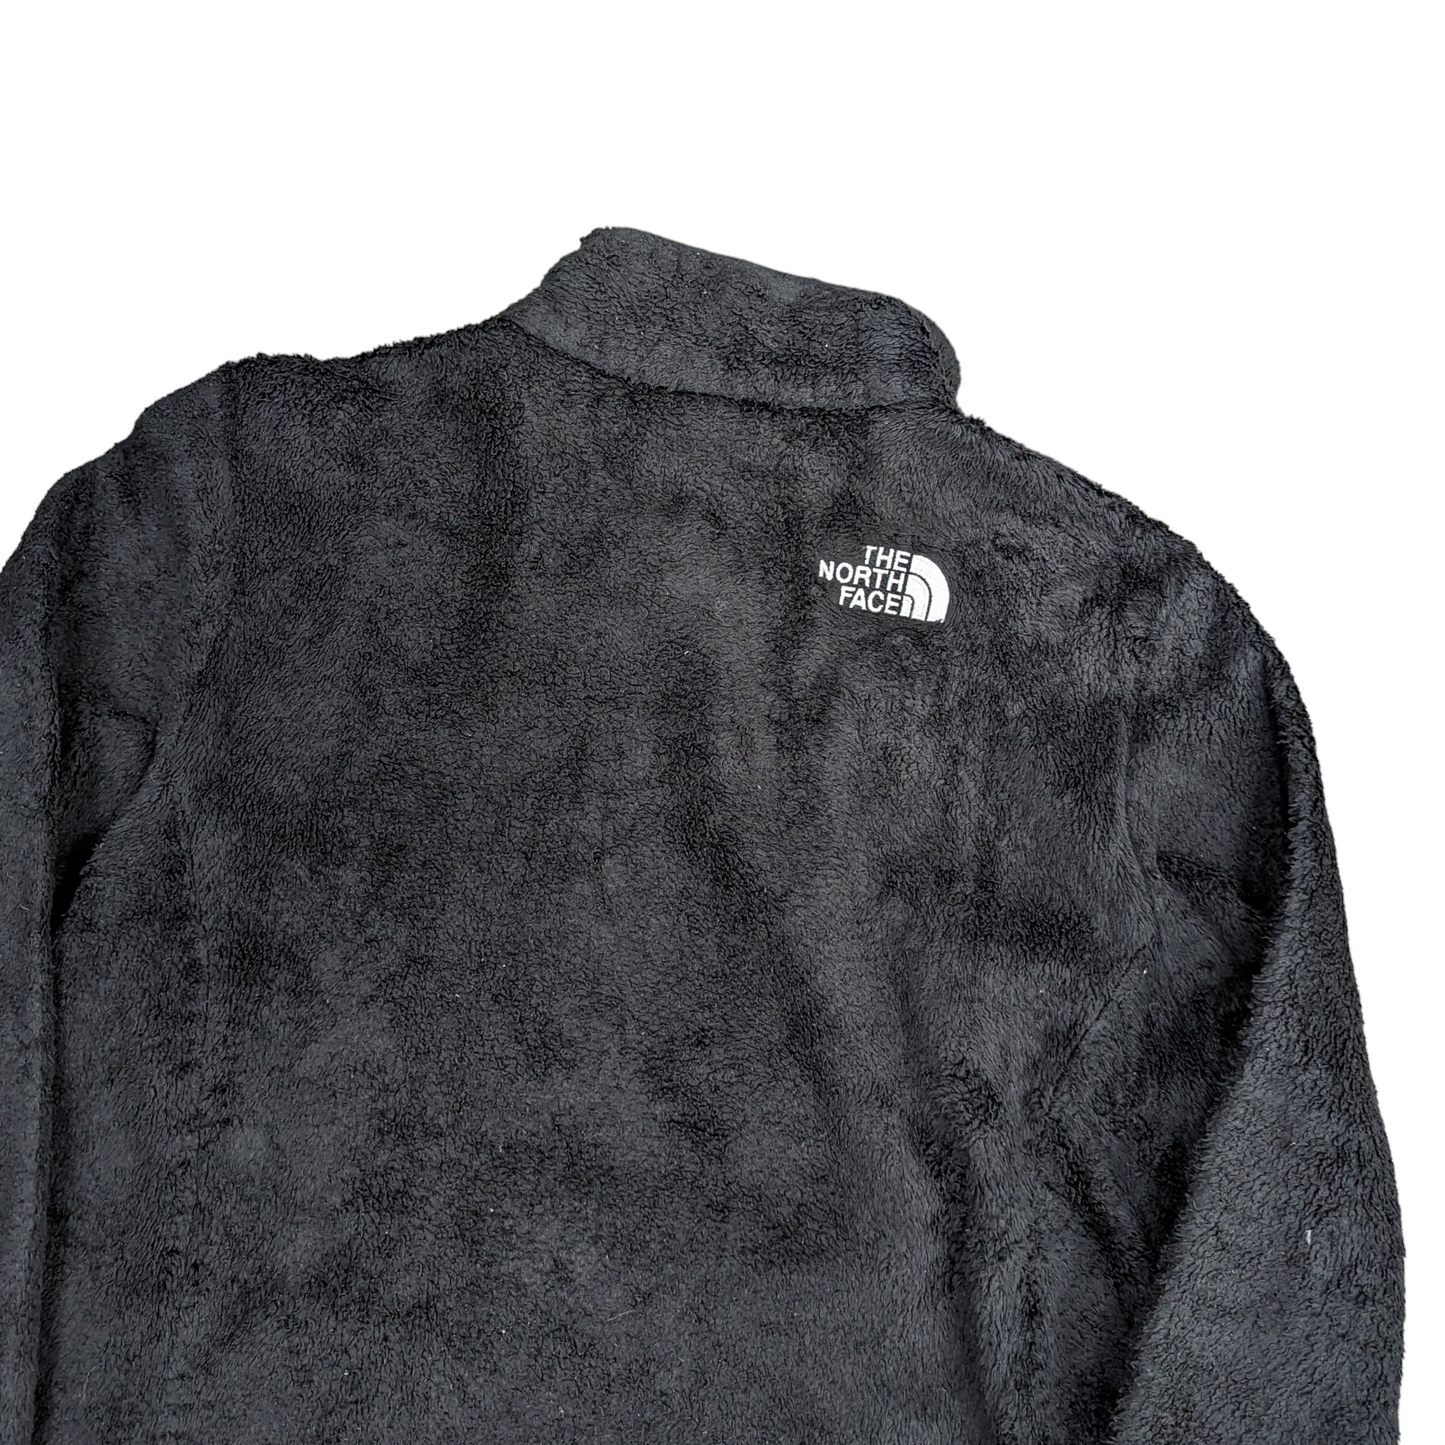 Women's The North Face Fleece Size S